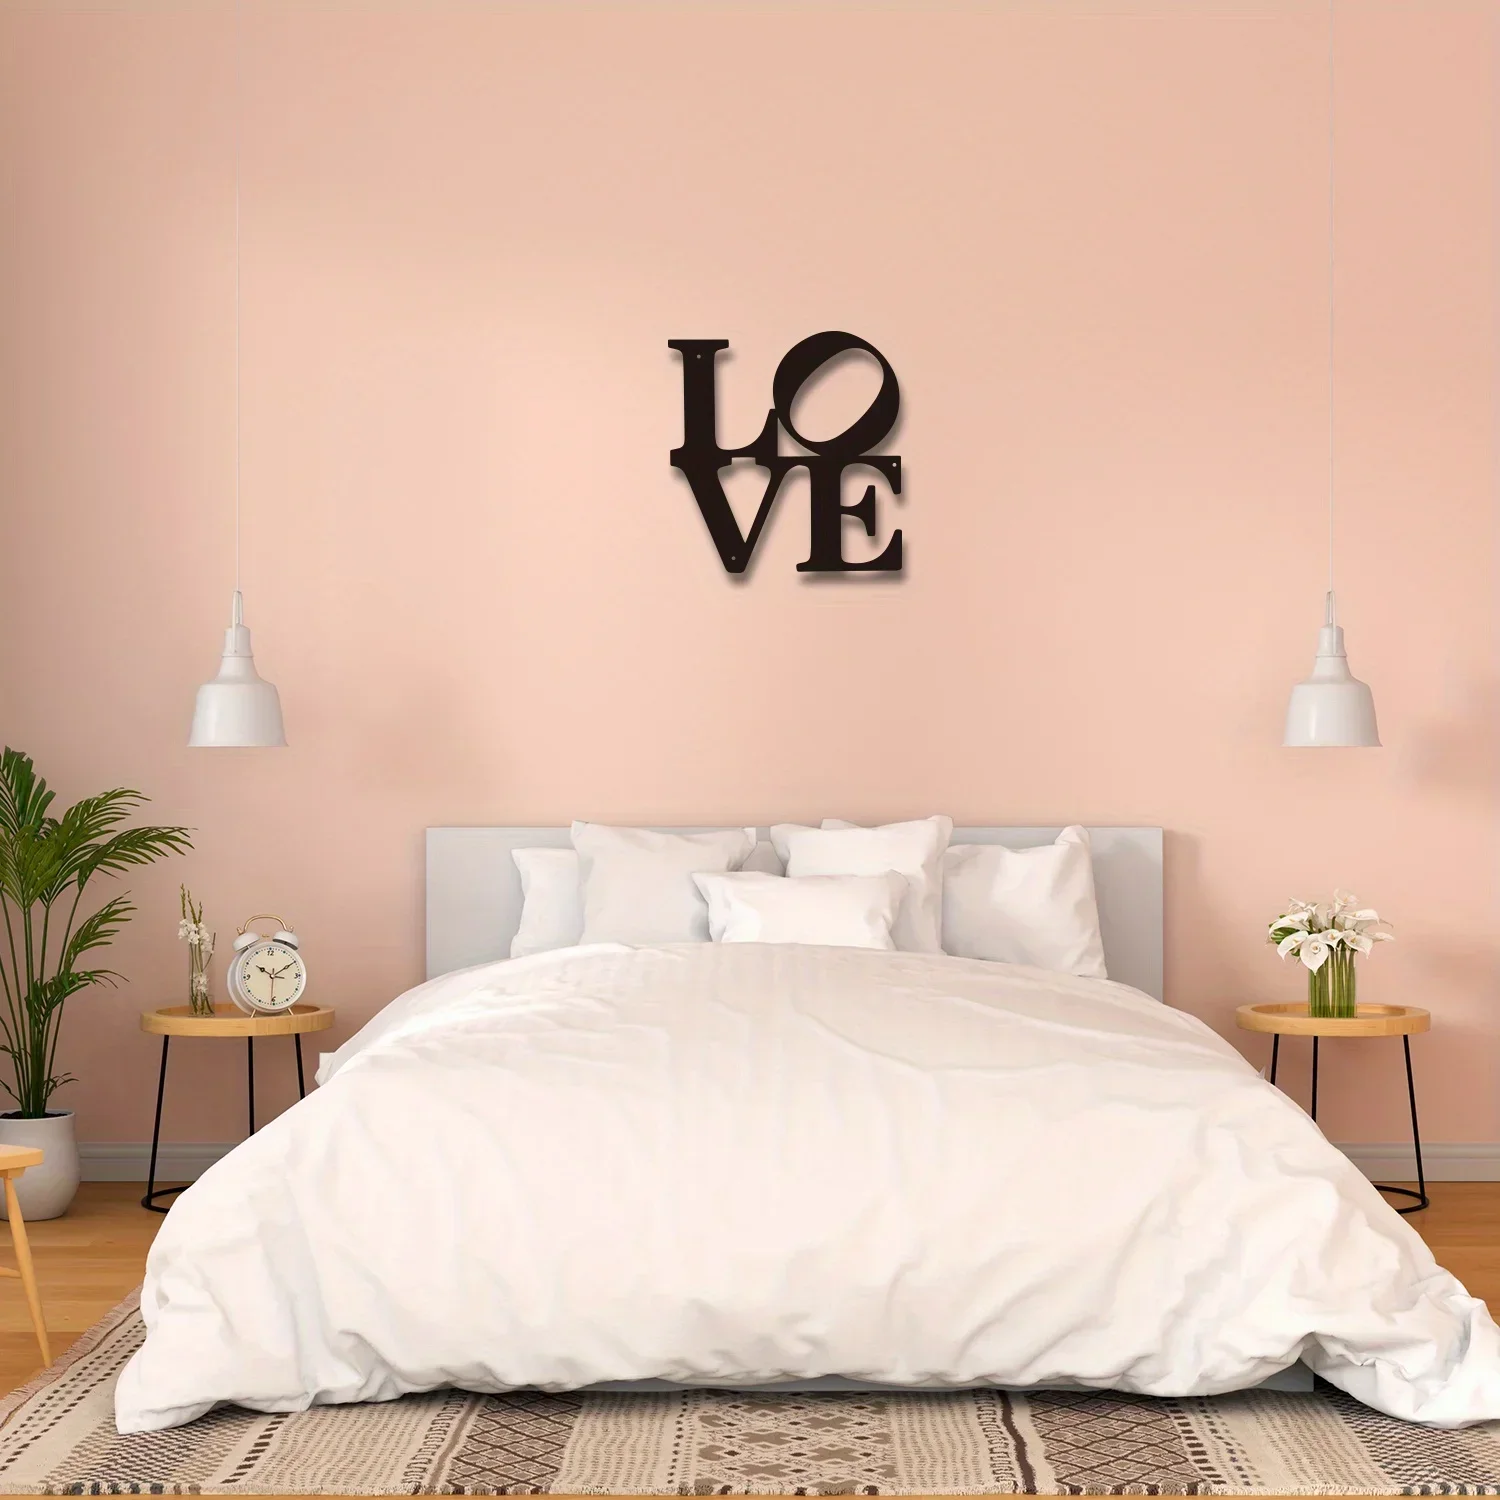 

CIFBUY Decoration 1pc Love Wall Art, Metal Wall Hanging Art, Romantic Gifts, Bedroom Decor, Couple Gifts, Gifts for Her,home Dec